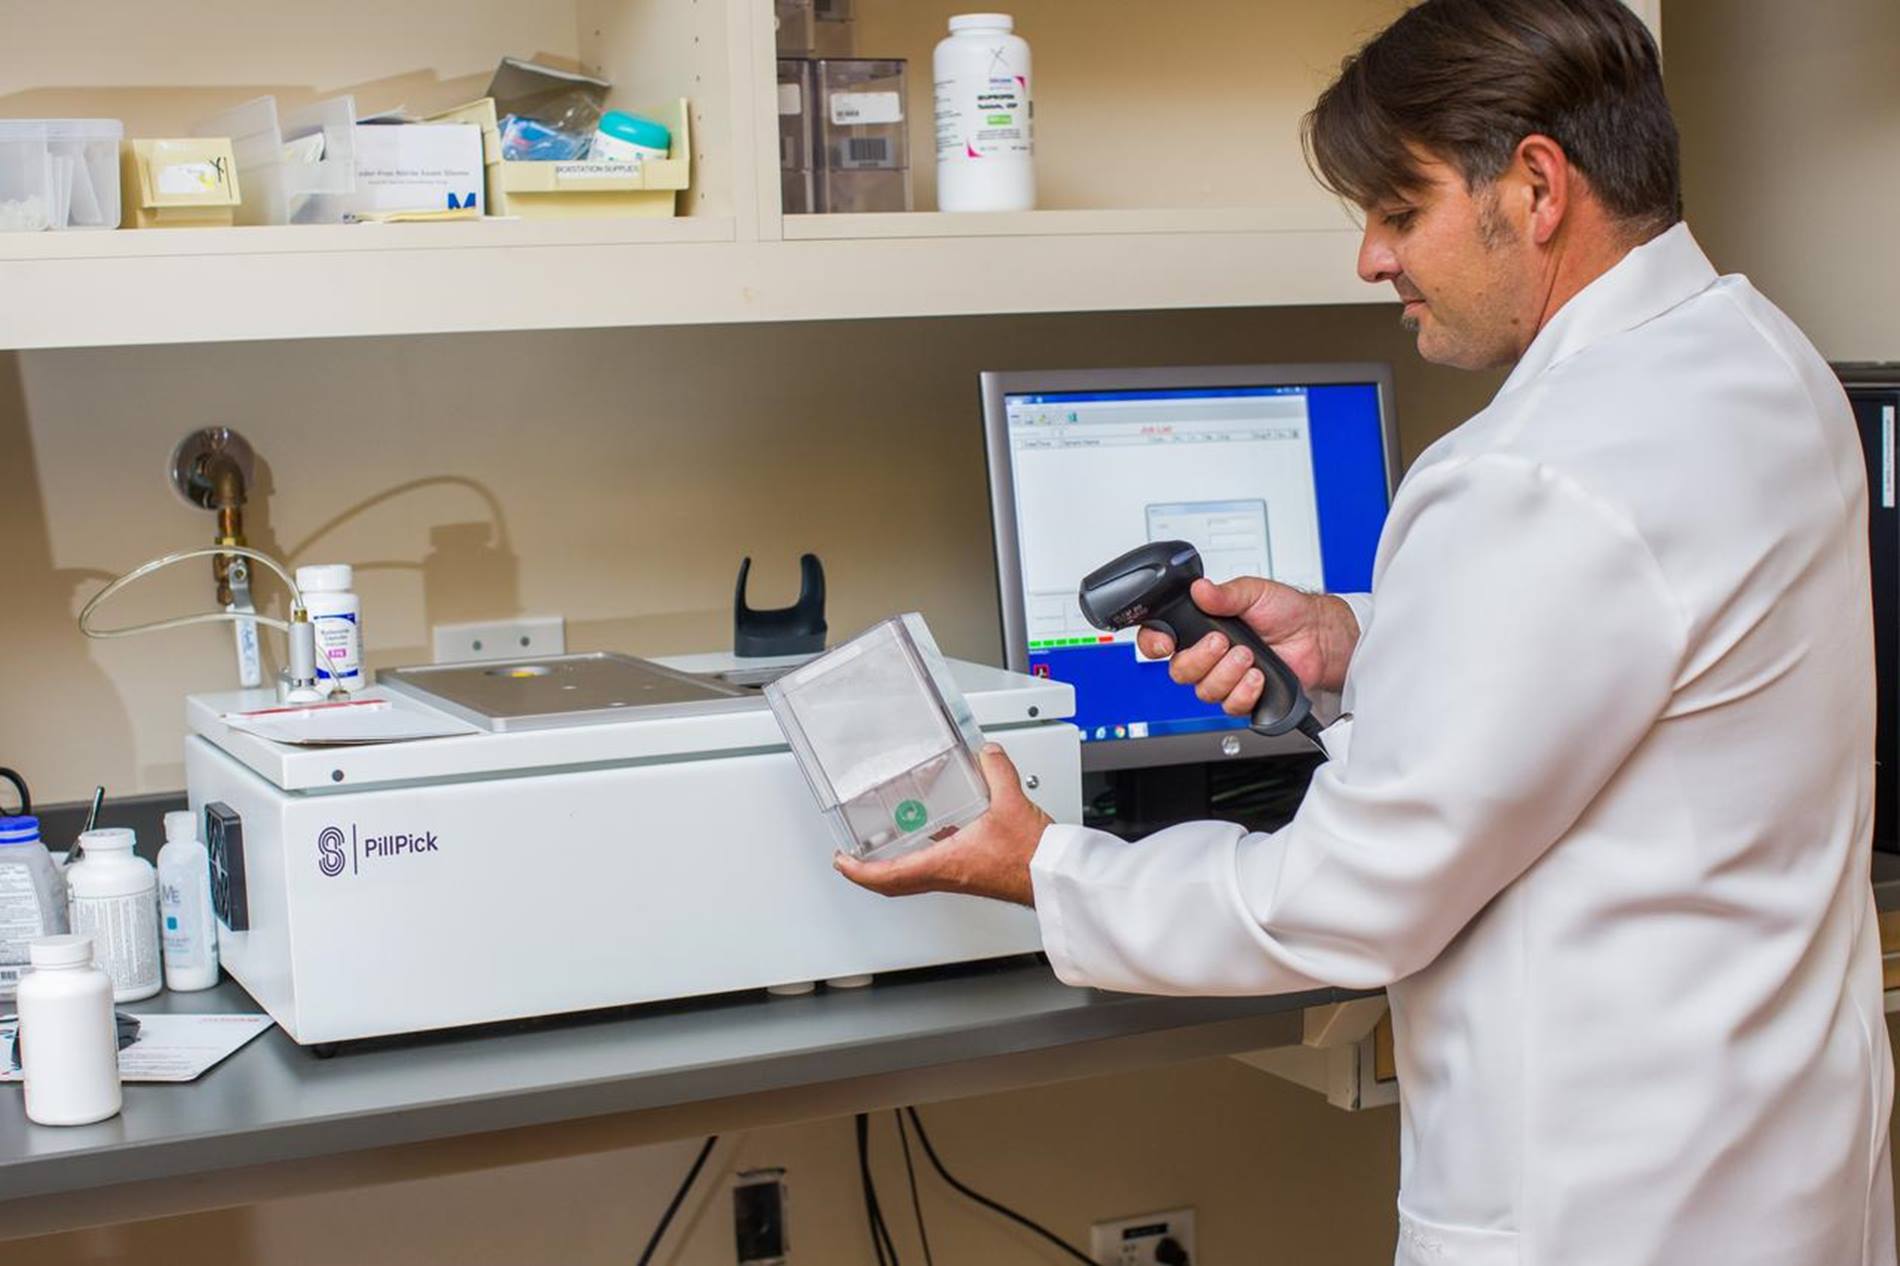 pharmacist scanning medication container